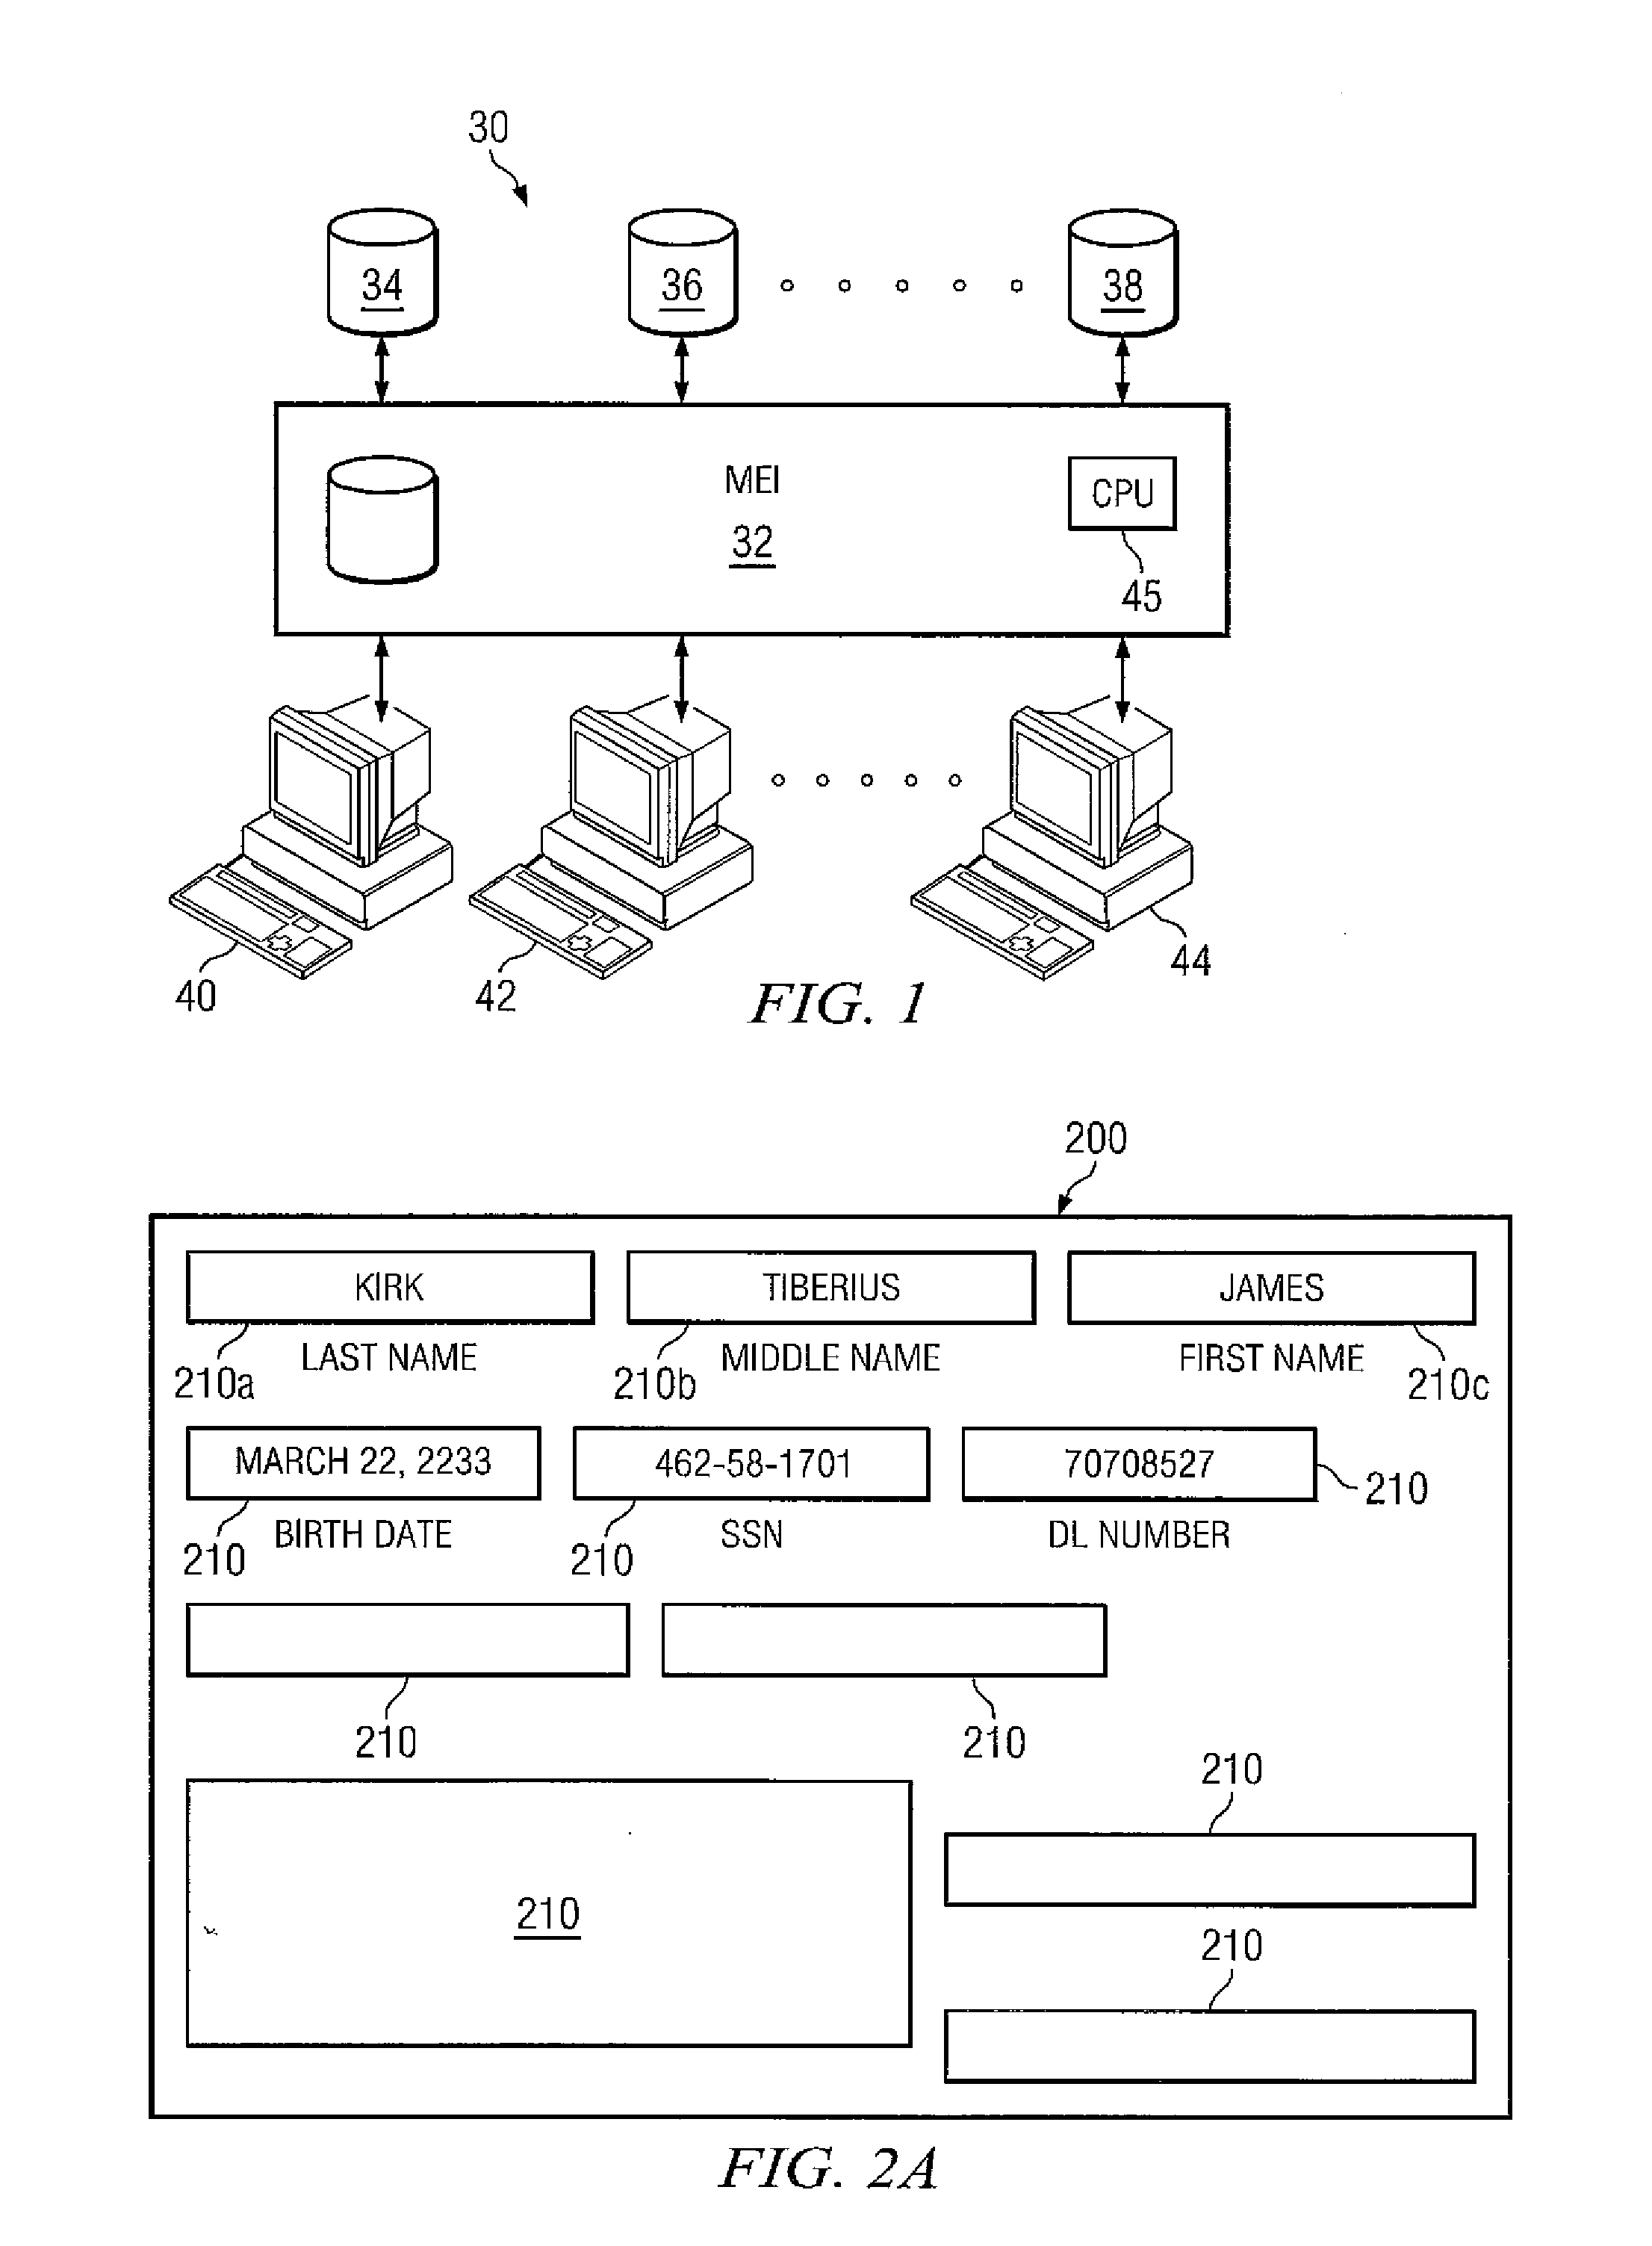 Method and system for indexing, relating and managing information about entities